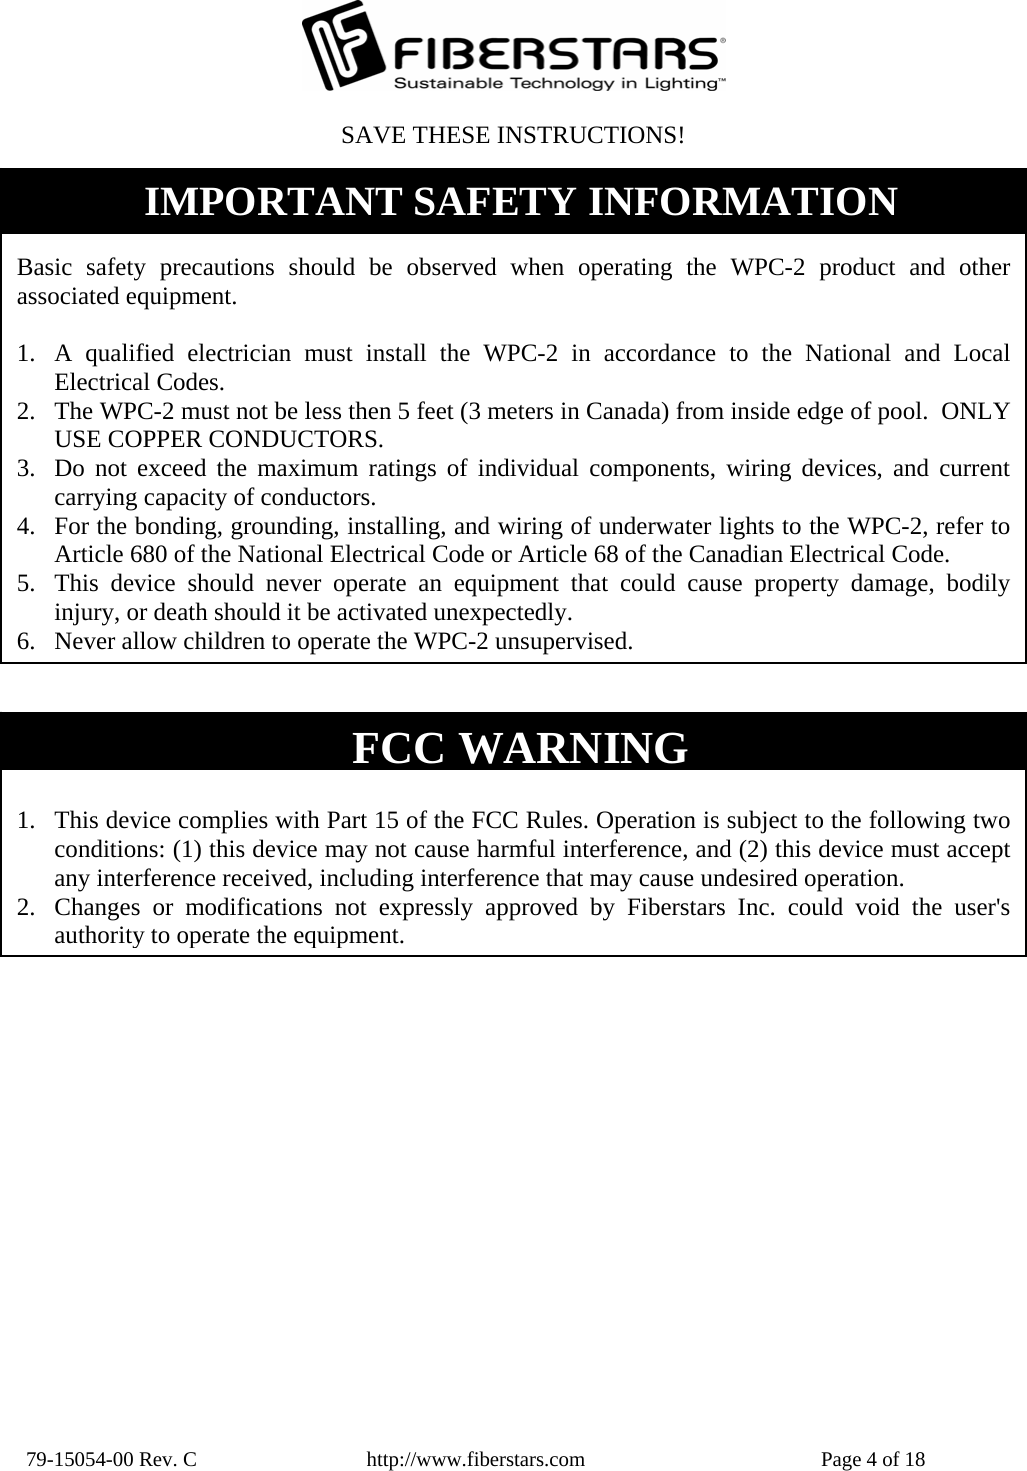  79-15054-00 Rev. C  http://www.fiberstars.com  Page 4 of 18 FCC WARNING  1. This device complies with Part 15 of the FCC Rules. Operation is subject to the following two conditions: (1) this device may not cause harmful interference, and (2) this device must accept any interference received, including interference that may cause undesired operation. 2. Changes or modifications not expressly approved by Fiberstars Inc. could void the user&apos;s authority to operate the equipment.SAVE THESE INSTRUCTIONS!  Basic safety precautions should be observed when operating the WPC-2 product and other associated equipment.  1. A qualified electrician must install the WPC-2 in accordance to the National and Local Electrical Codes. 2. The WPC-2 must not be less then 5 feet (3 meters in Canada) from inside edge of pool.  ONLY USE COPPER CONDUCTORS. 3. Do not exceed the maximum ratings of individual components, wiring devices, and current carrying capacity of conductors. 4. For the bonding, grounding, installing, and wiring of underwater lights to the WPC-2, refer to Article 680 of the National Electrical Code or Article 68 of the Canadian Electrical Code. 5. This device should never operate an equipment that could cause property damage, bodily injury, or death should it be activated unexpectedly. 6. Never allow children to operate the WPC-2 unsupervised. IMPORTANT SAFETY INFORMATION 